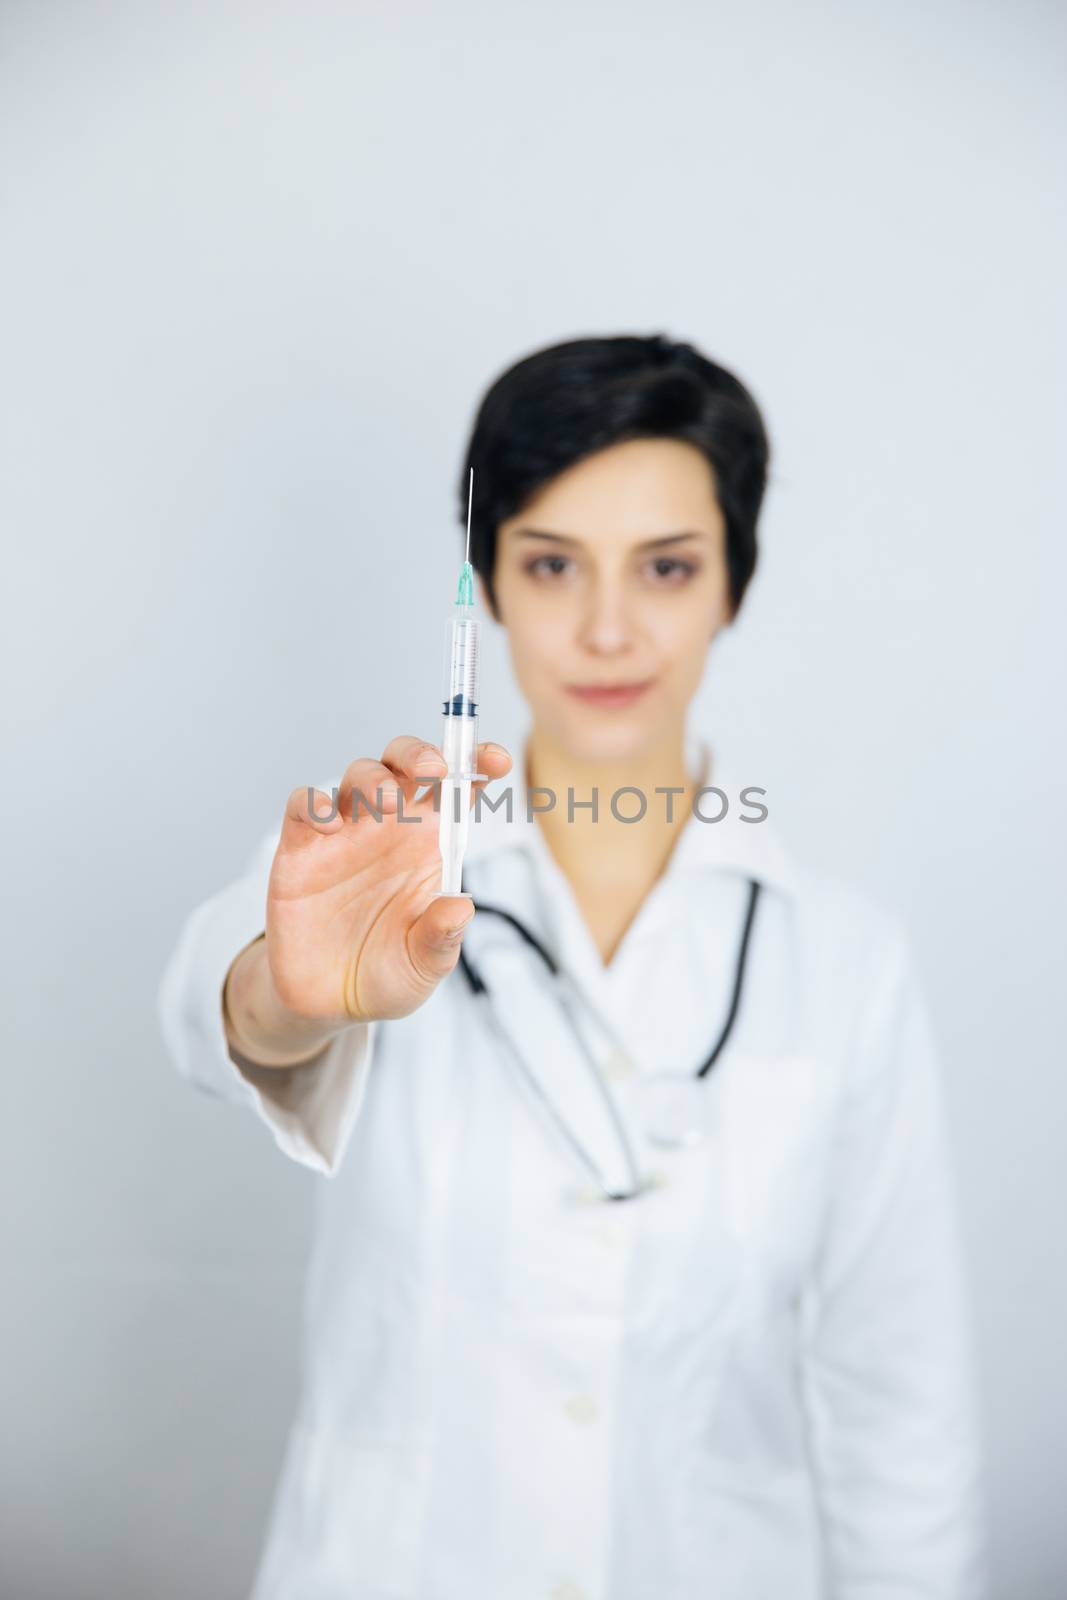 Female doctor with syringe, isolated on white background. Medicine and health care concept.